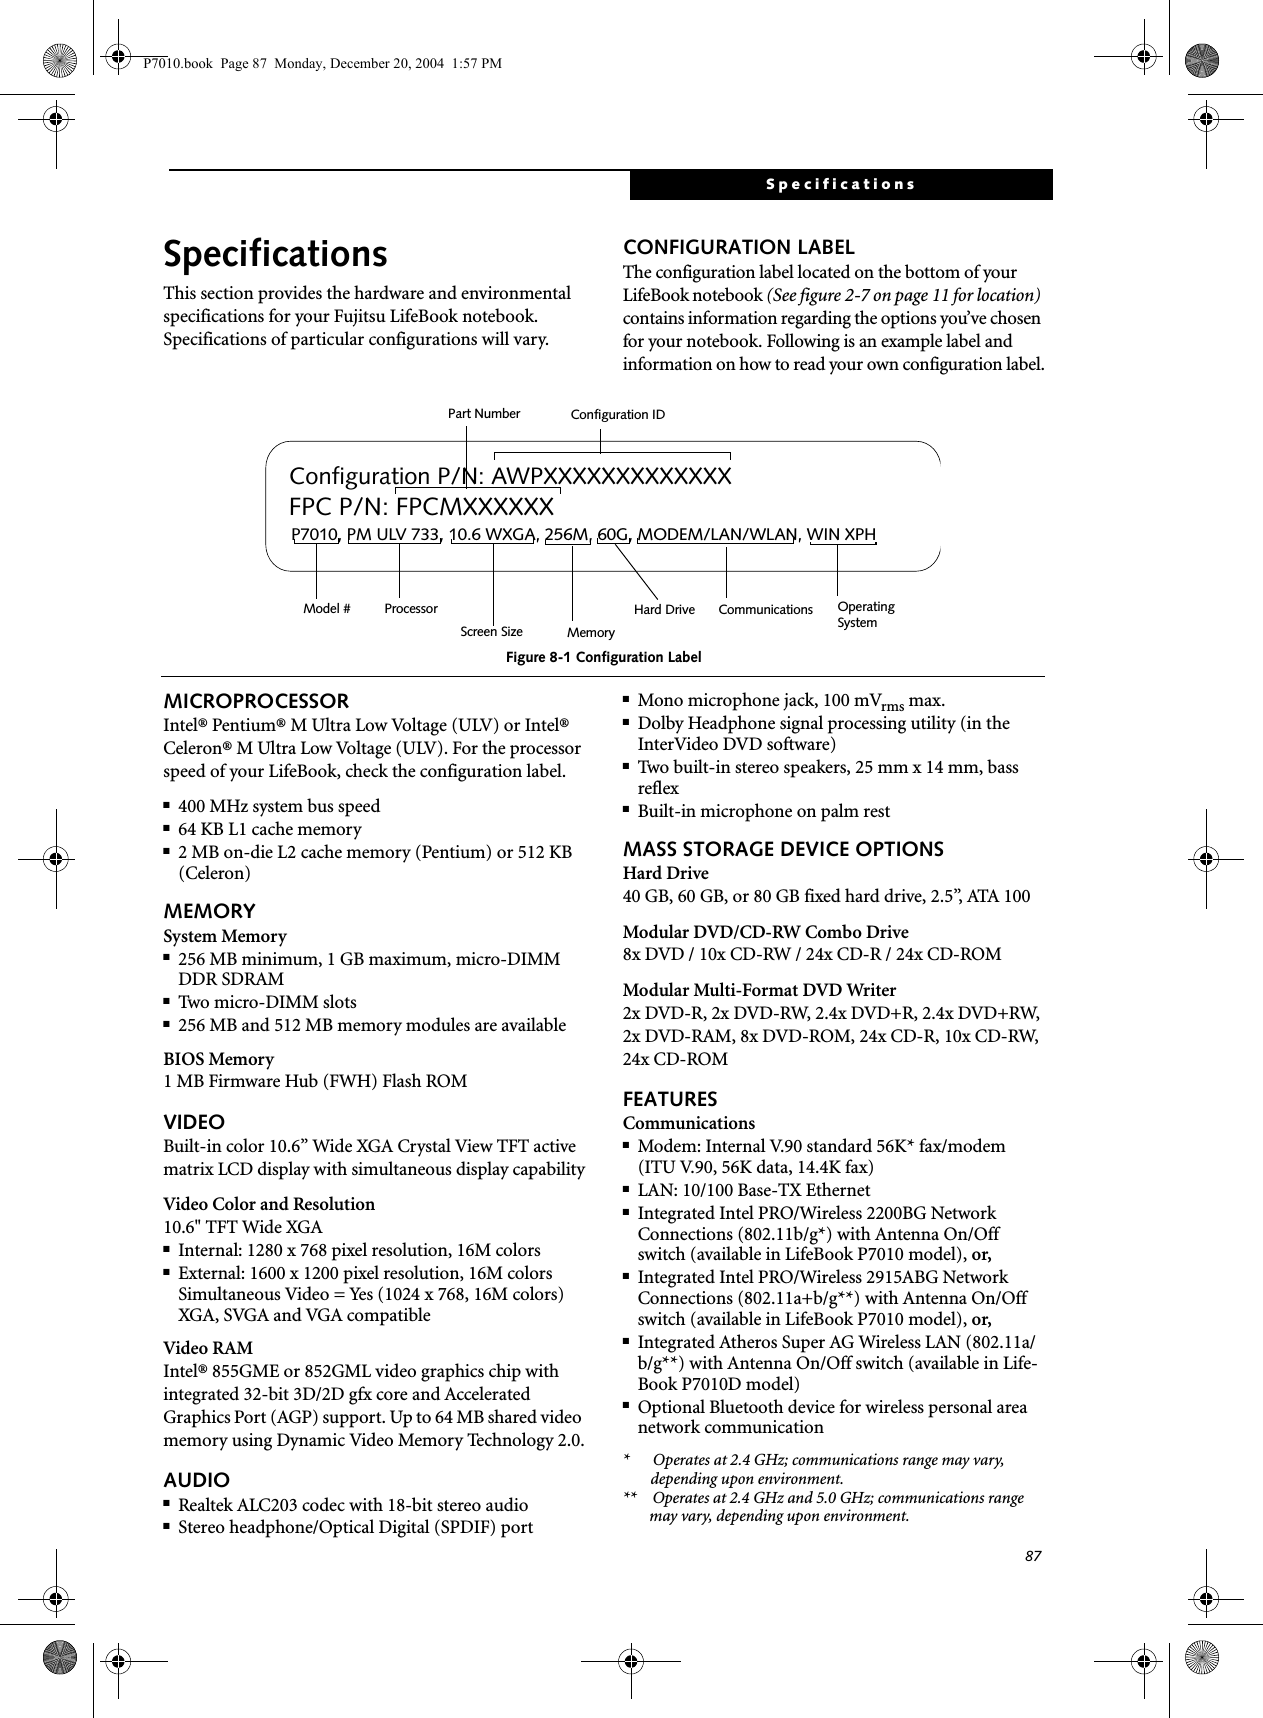 87SpecificationsSpecificationsThis section provides the hardware and environmental specifications for your Fujitsu LifeBook notebook.Specifications of particular configurations will vary.CONFIGURATION LABELThe configuration label located on the bottom of your LifeBook notebook (See figure 2-7 on page 11 for location) contains information regarding the options you’ve chosen for your notebook. Following is an example label and information on how to read your own configuration label.Figure 8-1 Configuration LabelMICROPROCESSORIntel® Pentium® M Ultra Low Voltage (ULV) or Intel® Celeron® M Ultra Low Voltage (ULV). For the processor speed of your LifeBook, check the configuration label.■400 MHz system bus speed ■64 KB L1 cache memory■2 MB on-die L2 cache memory (Pentium) or 512 KB (Celeron)MEMORYSystem Memory■256 MB minimum, 1 GB maximum, micro-DIMM DDR SDRAM■Two micro-DIMM slots■256 MB and 512 MB memory modules are availableBIOS Memory1 MB Firmware Hub (FWH) Flash ROMVIDEOBuilt-in color 10.6” Wide XGA Crystal View TFT active matrix LCD display with simultaneous display capabilityVideo Color and Resolution10.6&quot; TFT Wide XGA■Internal: 1280 x 768 pixel resolution, 16M colors■External: 1600 x 1200 pixel resolution, 16M colorsSimultaneous Video = Yes (1024 x 768, 16M colors) XGA, SVGA and VGA compatibleVideo RAMIntel® 855GME or 852GML video graphics chip with integrated 32-bit 3D/2D gfx core and Accelerated Graphics Port (AGP) support. Up to 64 MB shared video memory using Dynamic Video Memory Technology 2.0.AUDIO■Realtek ALC203 codec with 18-bit stereo audio■Stereo headphone/Optical Digital (SPDIF) port ■Mono microphone jack, 100 mVrms max.■Dolby Headphone signal processing utility (in the InterVideo DVD software)■Two built-in stereo speakers, 25 mm x 14 mm, bass reflex■Built-in microphone on palm restMASS STORAGE DEVICE OPTIONSHard Drive40 GB, 60 GB, or 80 GB fixed hard drive, 2.5”, ATA 100Modular DVD/CD-RW Combo Drive8x DVD / 10x CD-RW / 24x CD-R / 24x CD-ROMModular Multi-Format DVD Writer2x DVD-R, 2x DVD-RW, 2.4x DVD+R, 2.4x DVD+RW, 2x DVD-RAM, 8x DVD-ROM, 24x CD-R, 10x CD-RW, 24x CD-ROMFEATURESCommunications■Modem: Internal V.90 standard 56K* fax/modem(ITU V.90, 56K data, 14.4K fax) ■LAN: 10/100 Base-TX Ethernet ■Integrated Intel PRO/Wireless 2200BG Network Connections (802.11b/g*) with Antenna On/Off switch (available in LifeBook P7010 model), or,■Integrated Intel PRO/Wireless 2915ABG Network Connections (802.11a+b/g**) with Antenna On/Off switch (available in LifeBook P7010 model), or,■Integrated Atheros Super AG Wireless LAN (802.11a/b/g**) with Antenna On/Off switch (available in Life-Book P7010D model)■Optional Bluetooth device for wireless personal area network communication*      Operates at 2.4 GHz; communications range may vary, depending upon environment.**    Operates at 2.4 GHz and 5.0 GHz; communications range may vary, depending upon environment.P7010, PM ULV 733, 10.6 WXGA, 256M, 60G, MODEM/LAN/WLAN, WIN XPHConfiguration P/N: AWPXXXXXXXXXXXXXFPC P/N: FPCMXXXXXXOperating Hard Drive Configuration IDPart NumberProcessorModel #Screen Size Memory SystemCommunicationsP7010.book  Page 87  Monday, December 20, 2004  1:57 PM